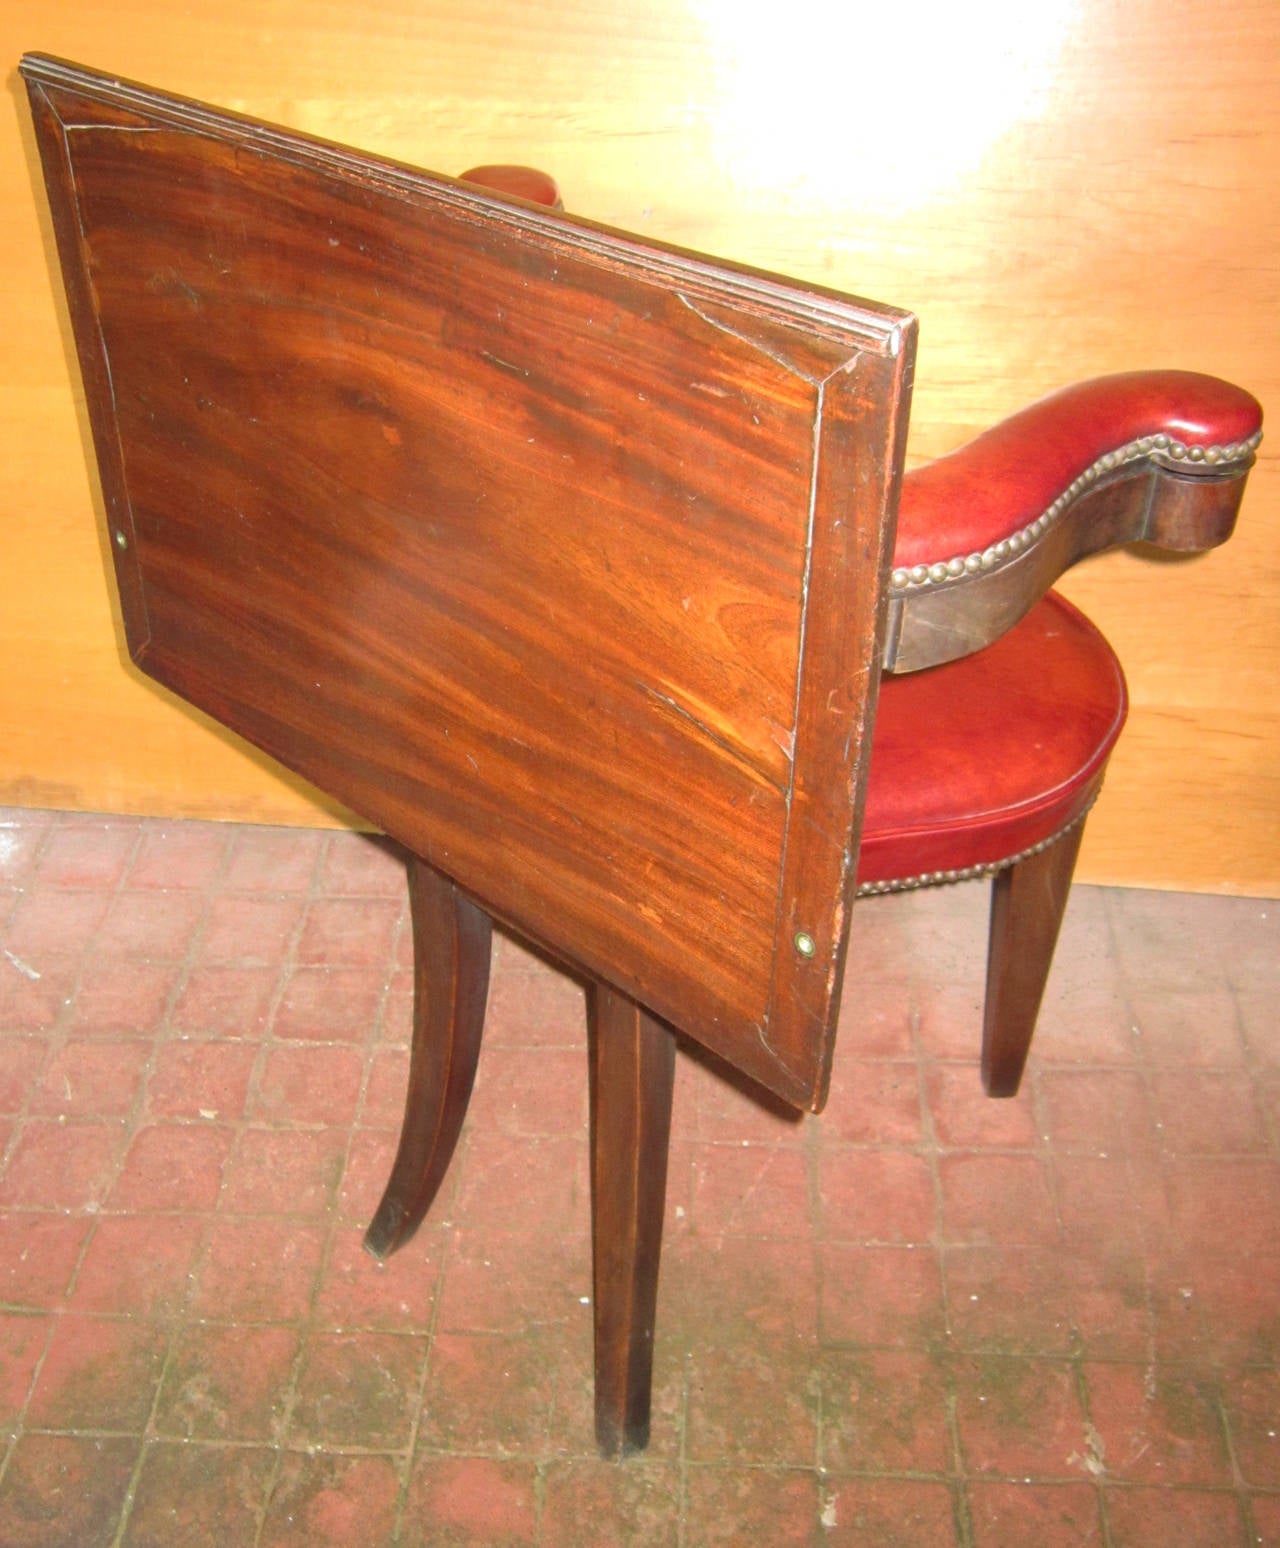 English Regency Reading Chair in Mahogany with Red Leather, Original Brasses In Good Condition For Sale In Ajijic, Jalisco